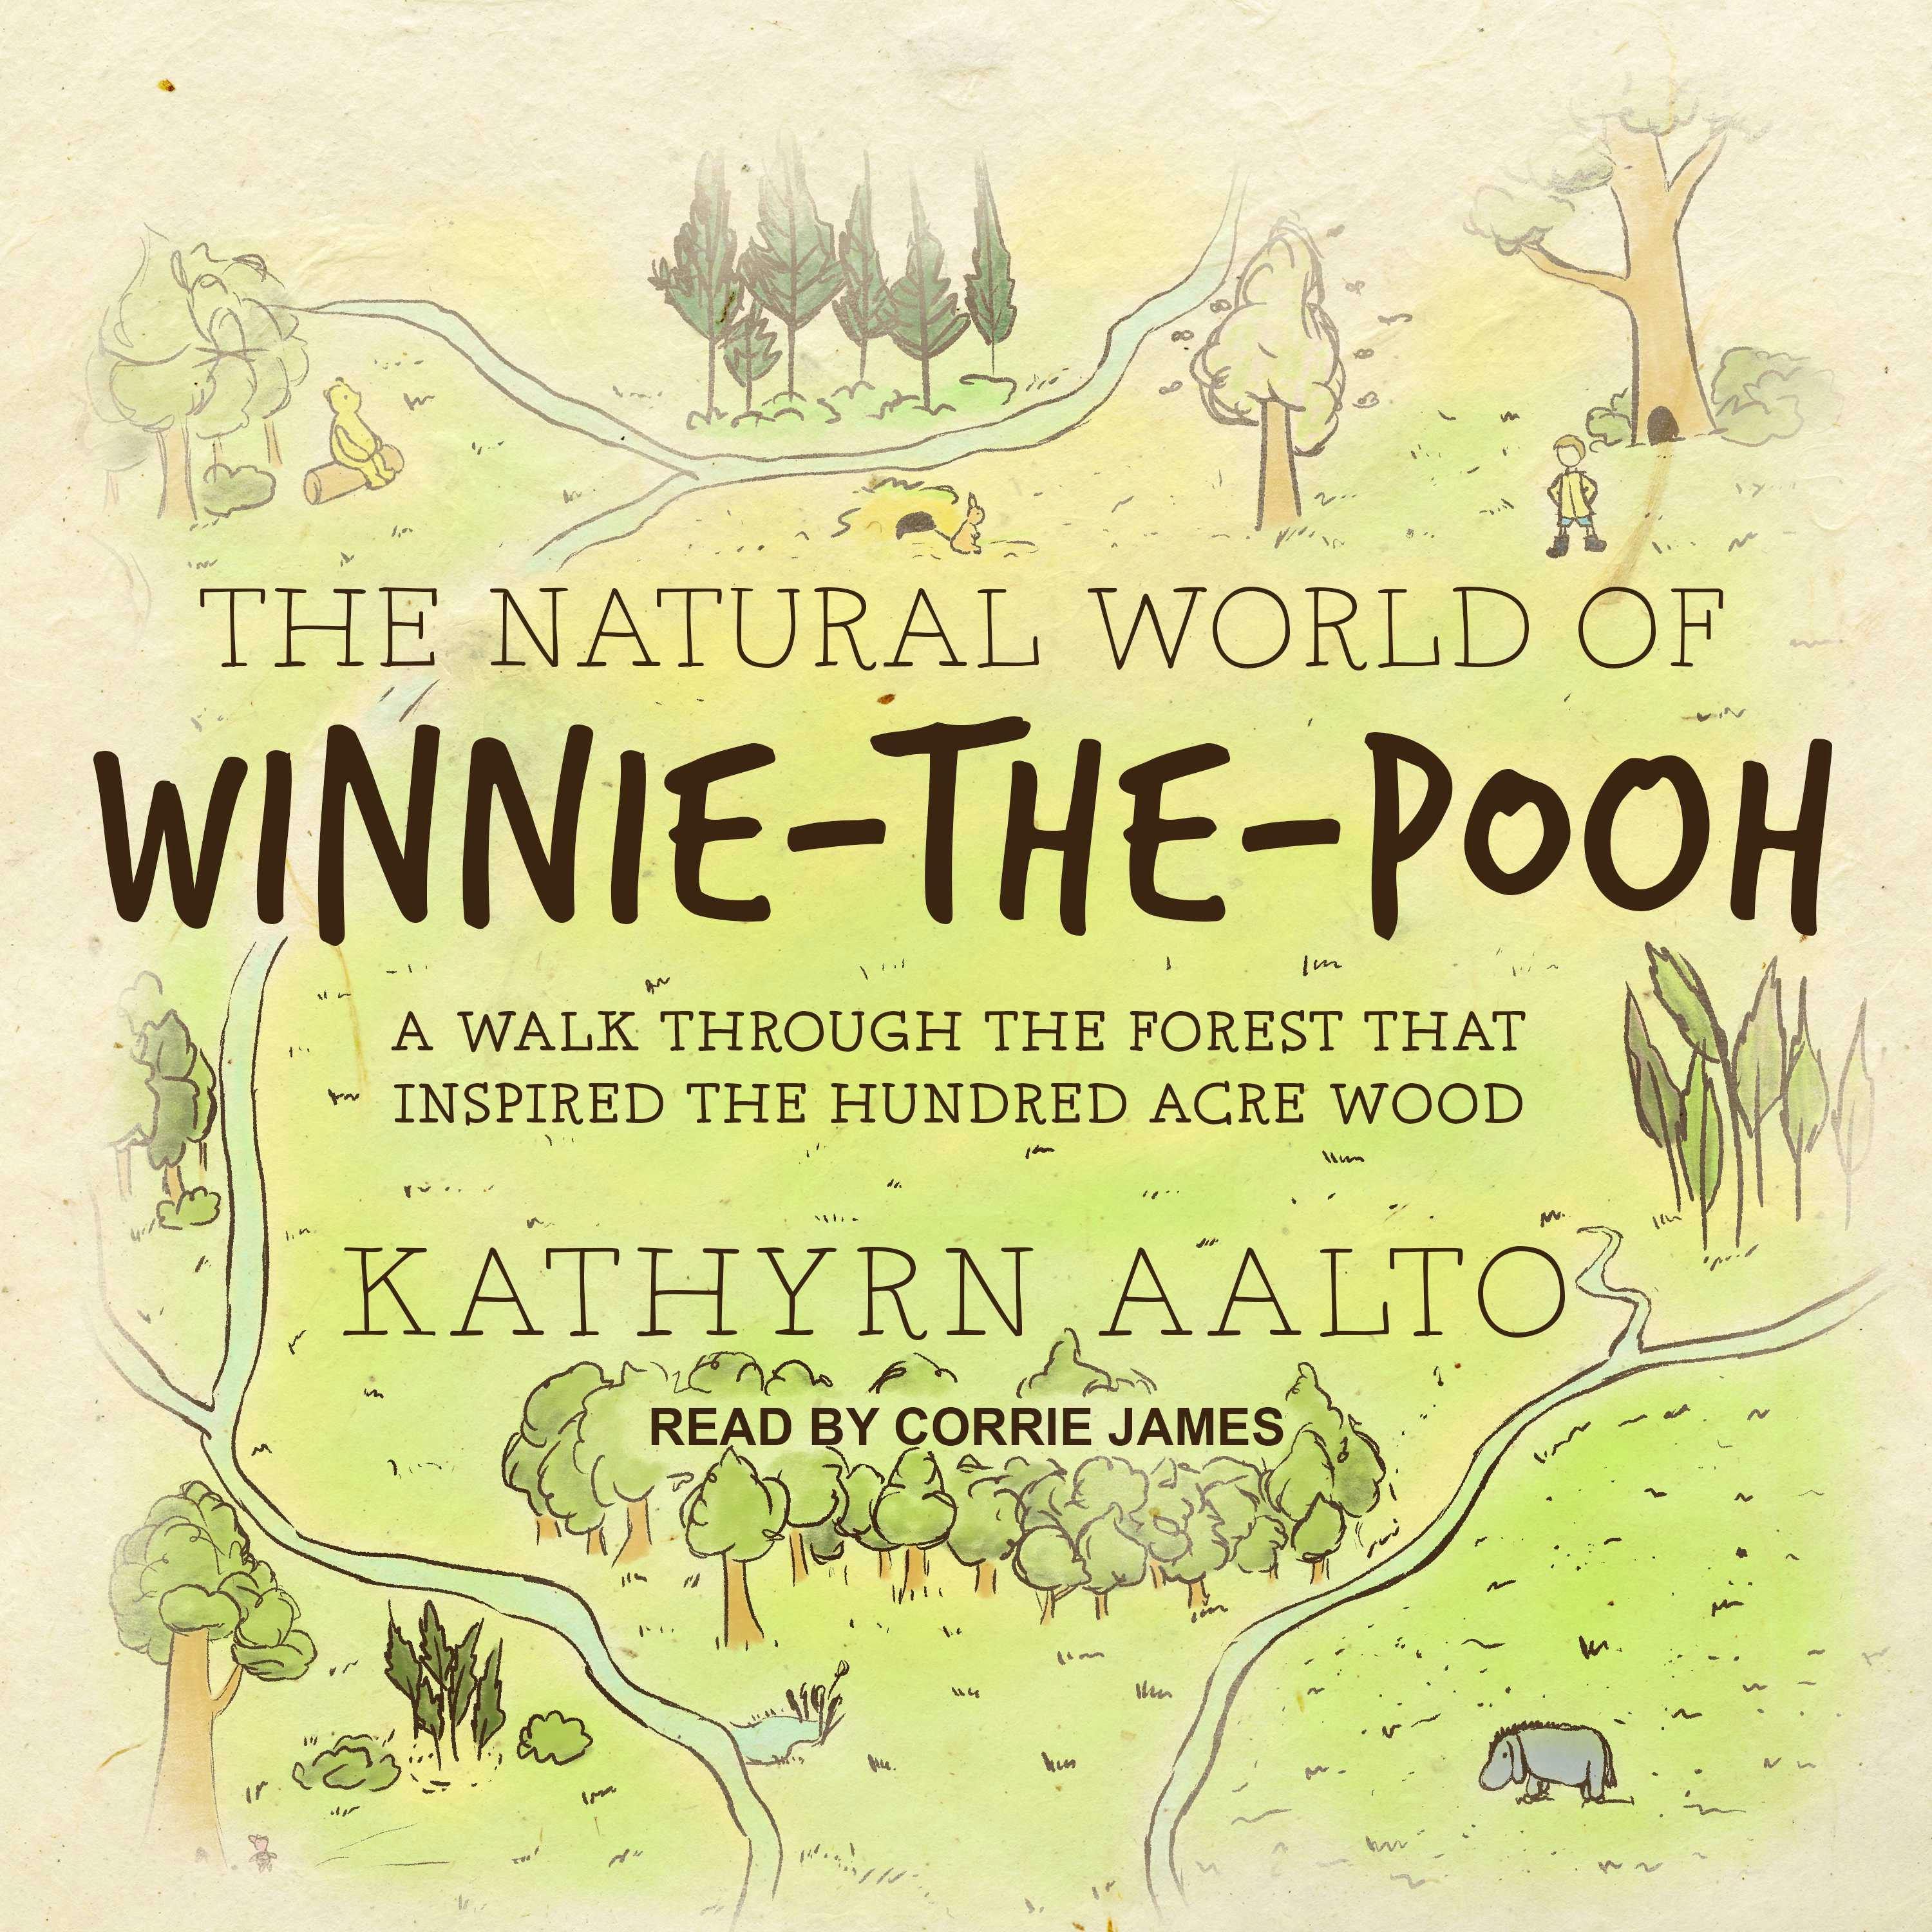 The Natural World of Winnie-the-Pooh: A Walk Through the Forest that Inspired the Hundred Acre Wood - Kathryn Aalto